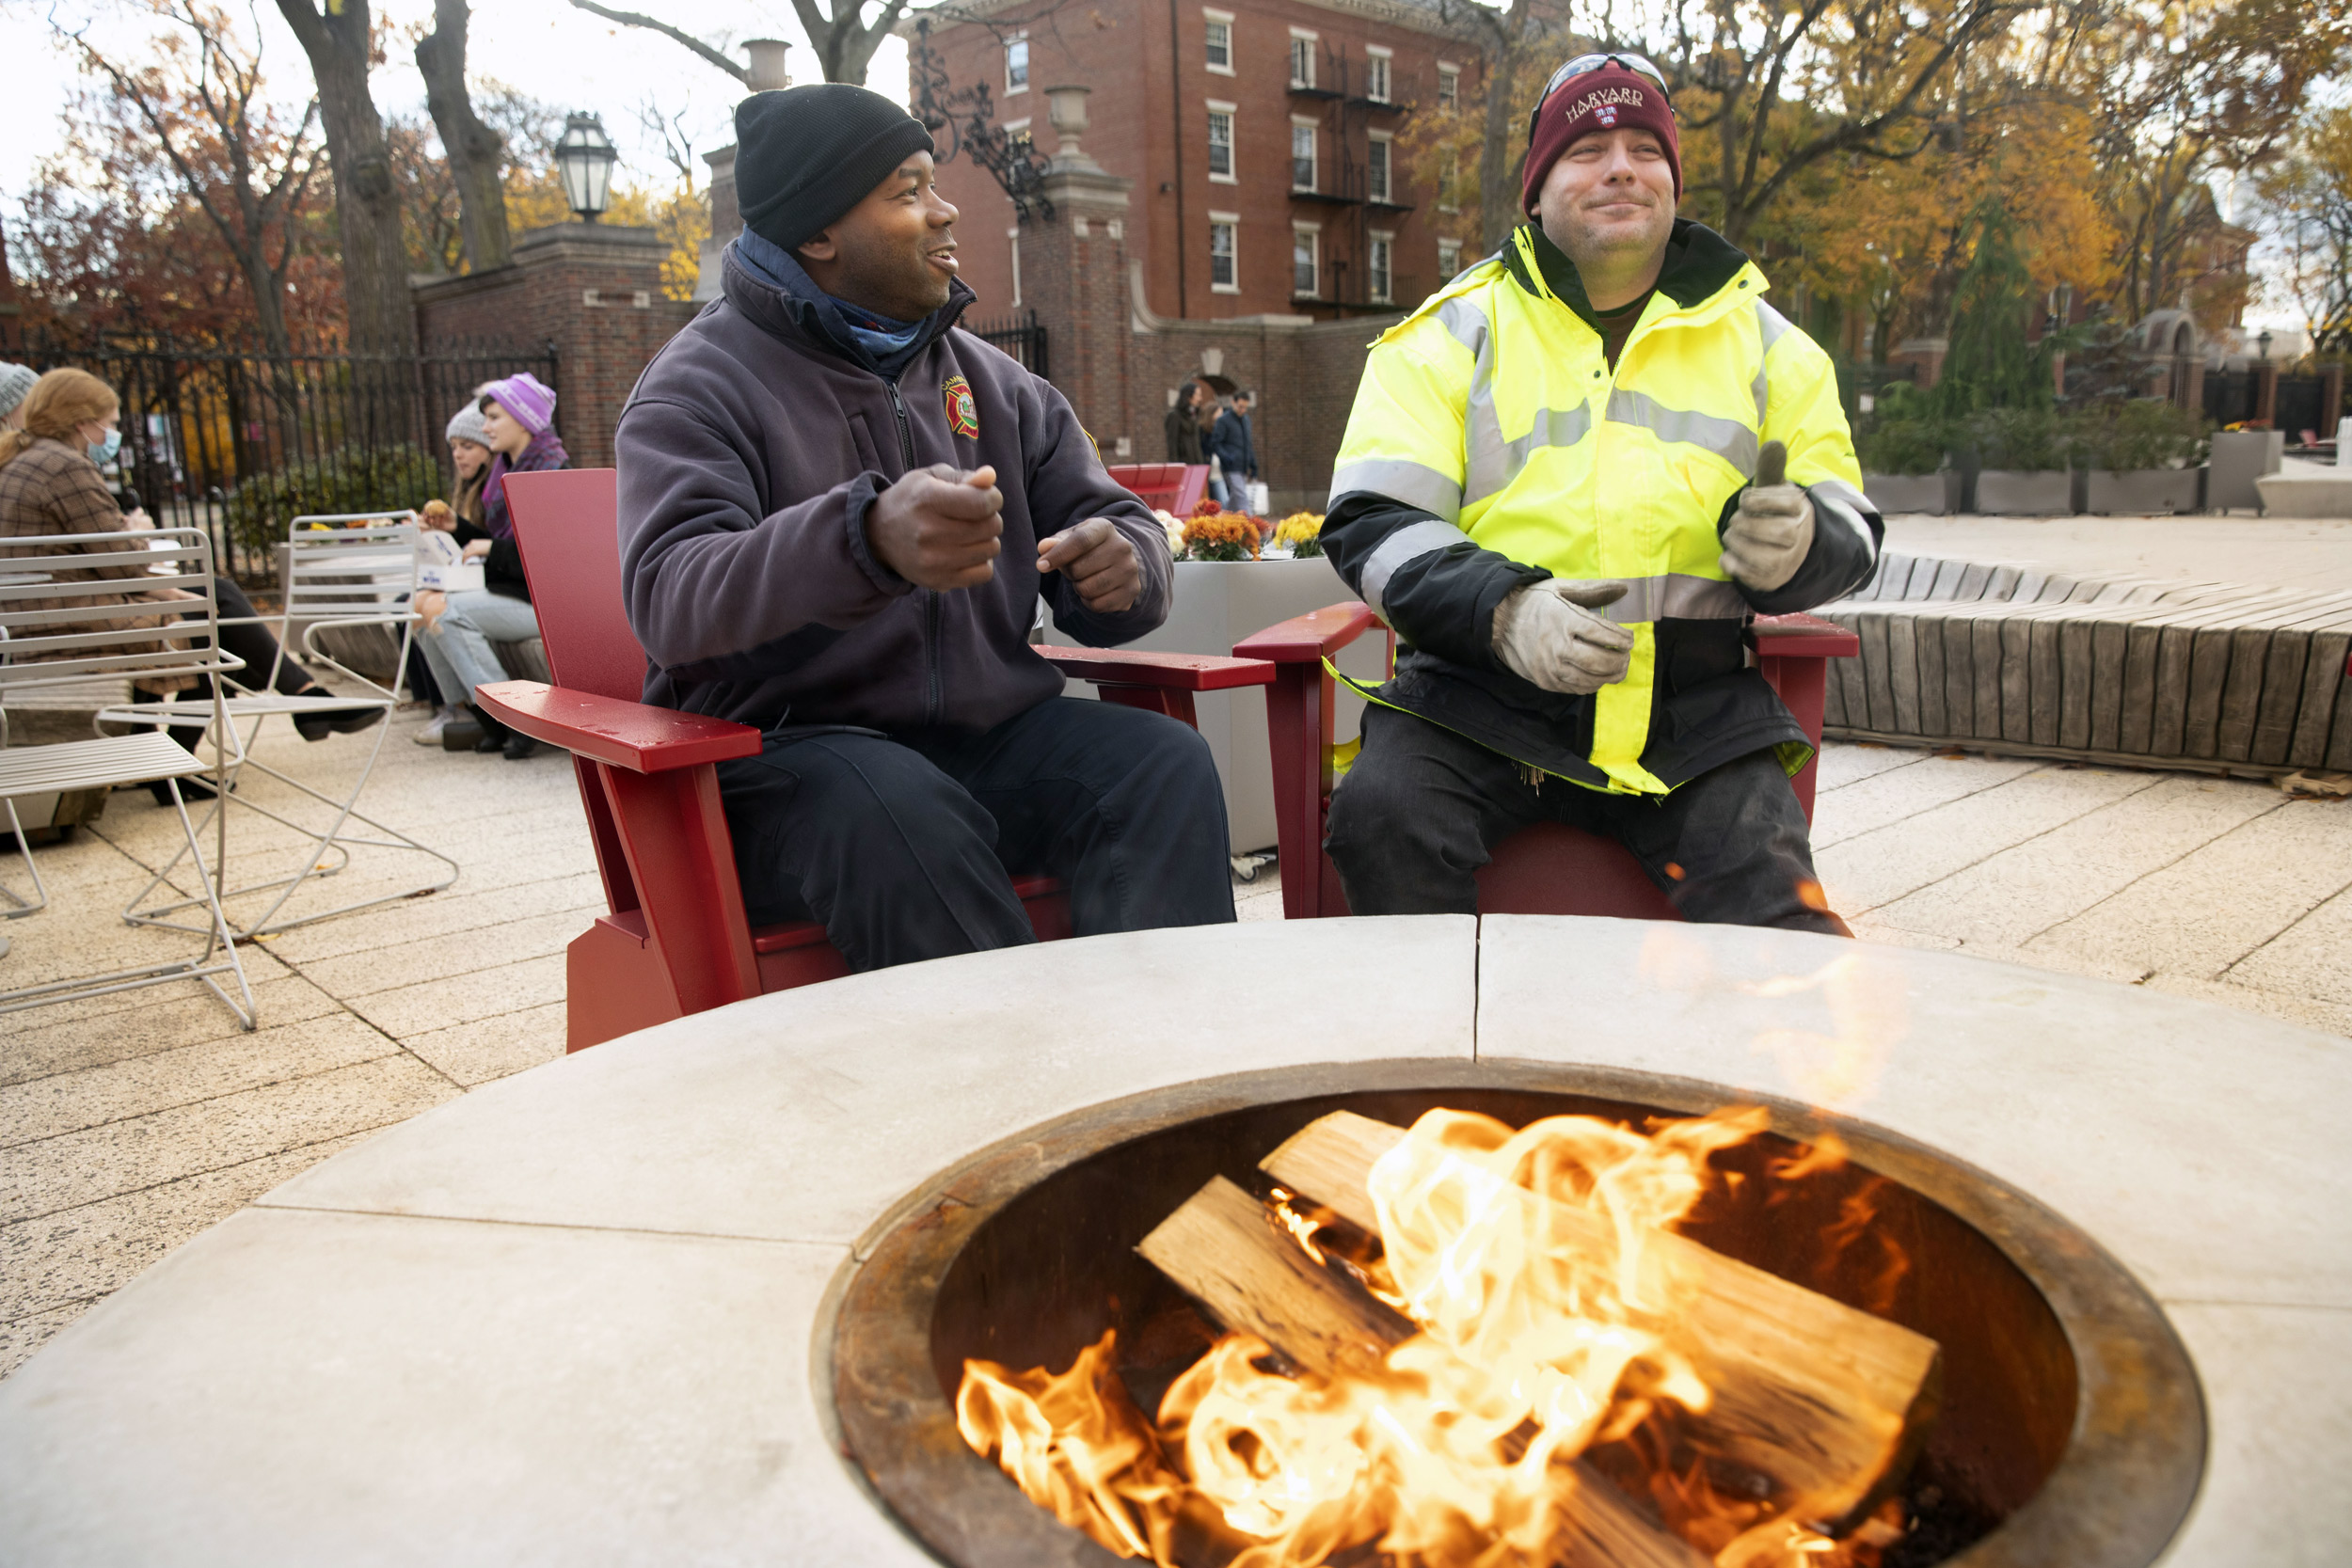 Cambridge firefighter John Bernard (left) and Mike Paszkiewicz of Facilities Maintenance Operations and Campus Services warm their hands over a fire pit at the Science Center Plaza.